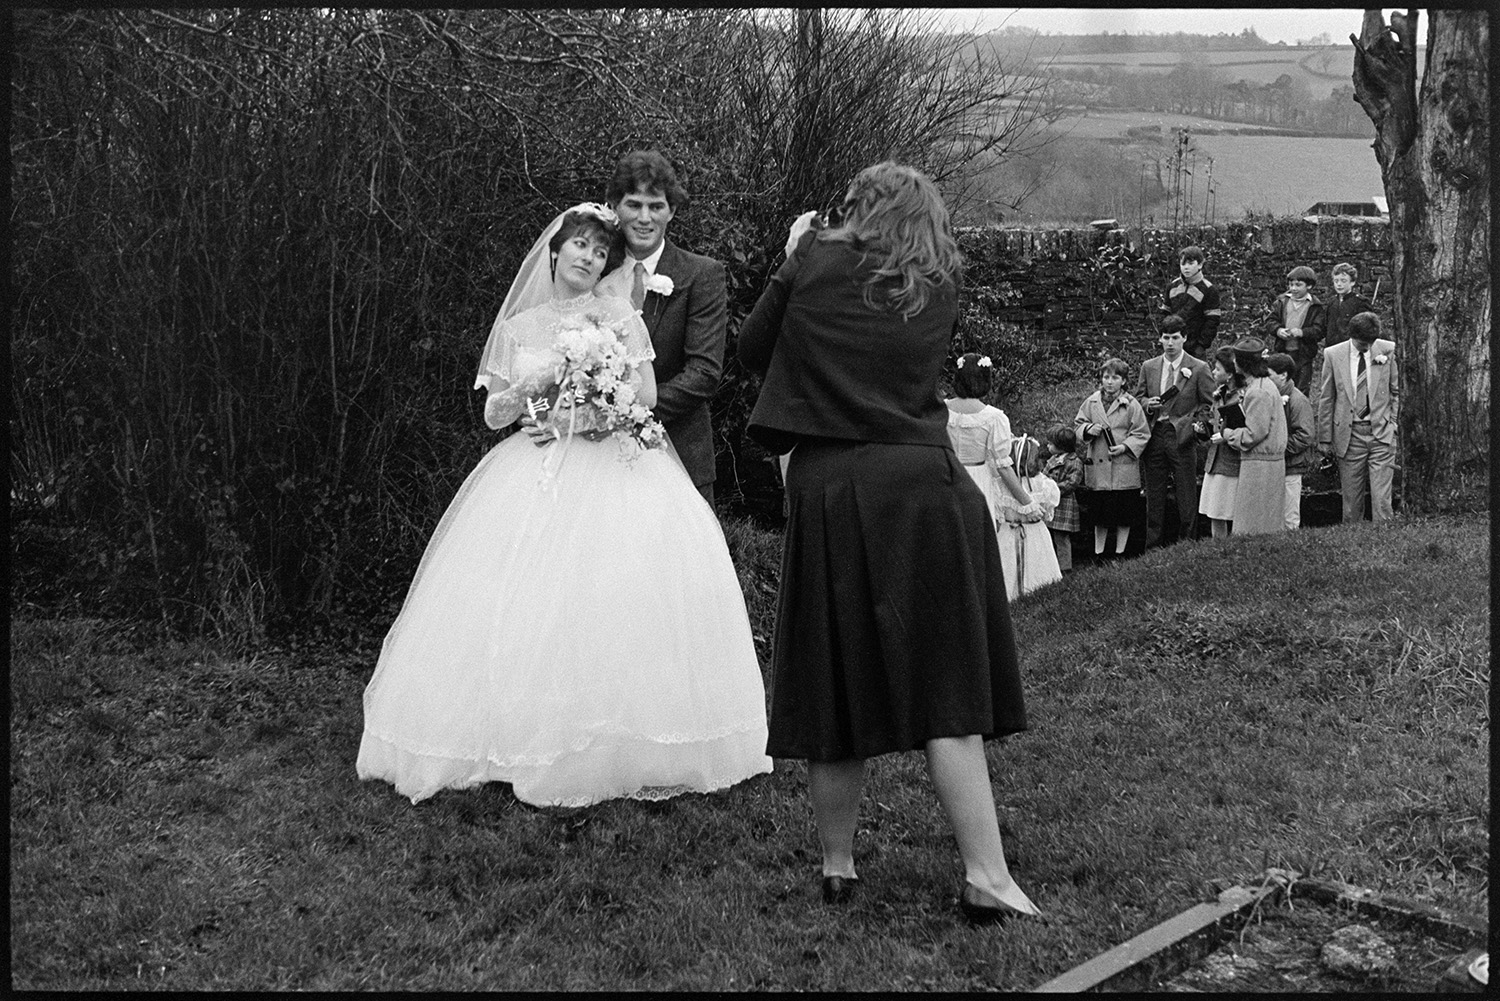 Bride, groom and guests outside church after wedding, photographer. 
[A woman photographing a bride and groom in Dolton churchyard after their wedding. Wedding guests are watching nearby.]